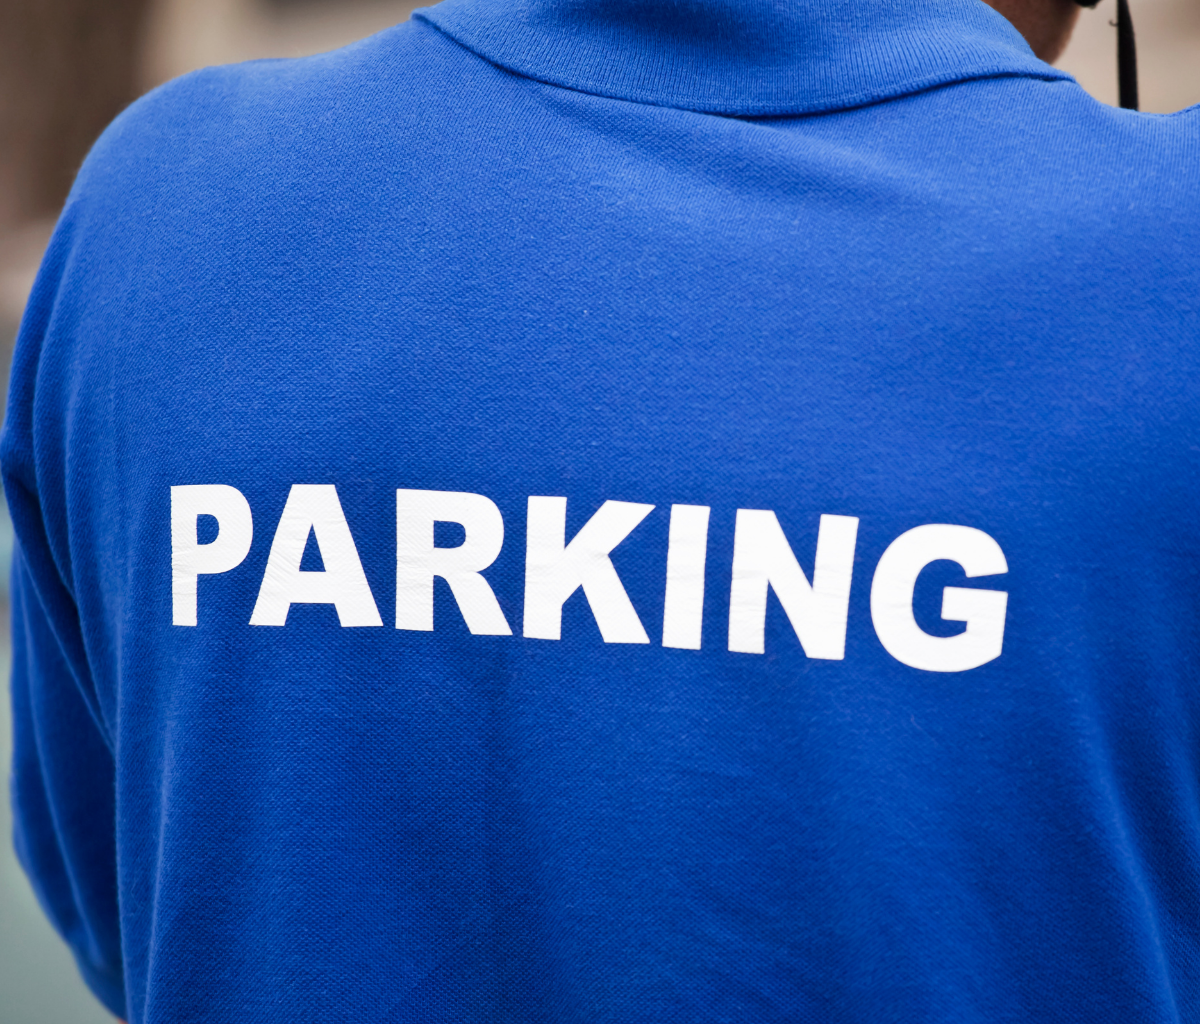 Choosing the right parking management company